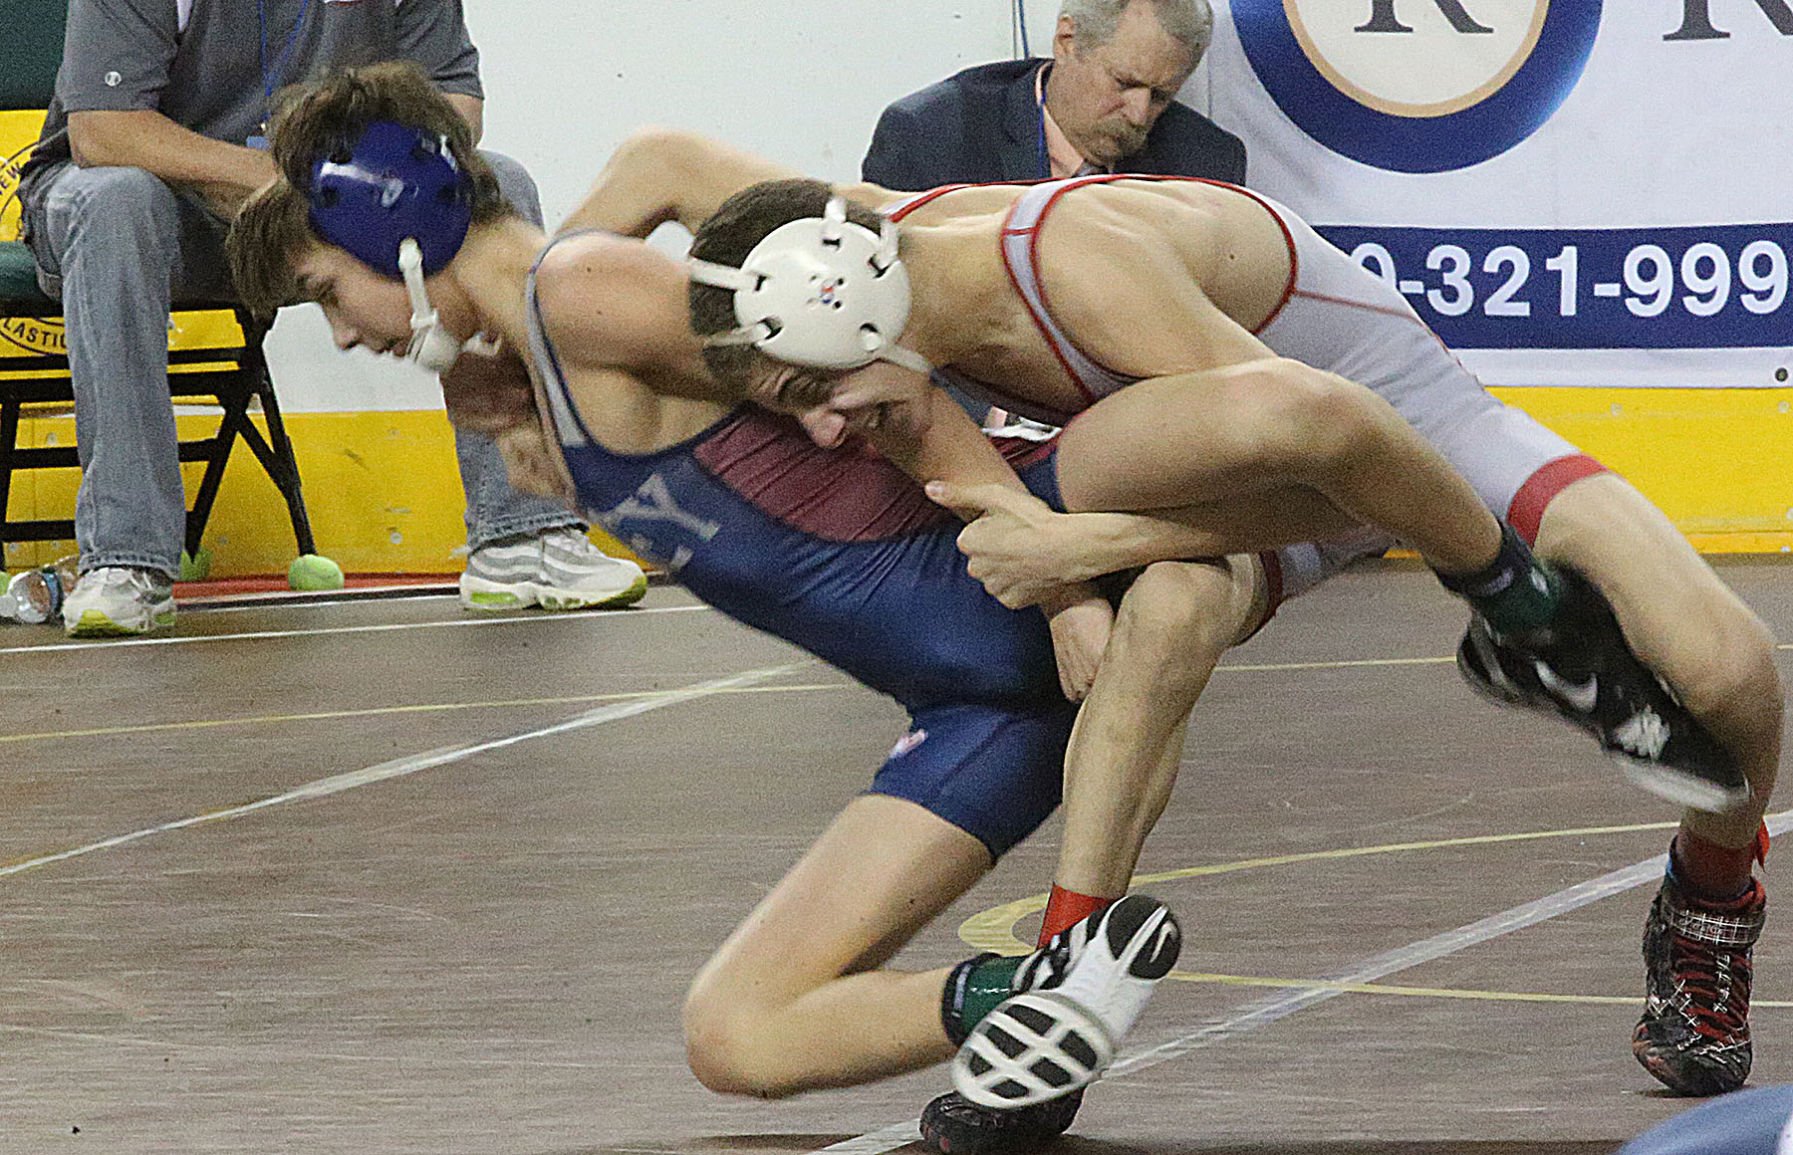 See whos wrestling in District 27 image